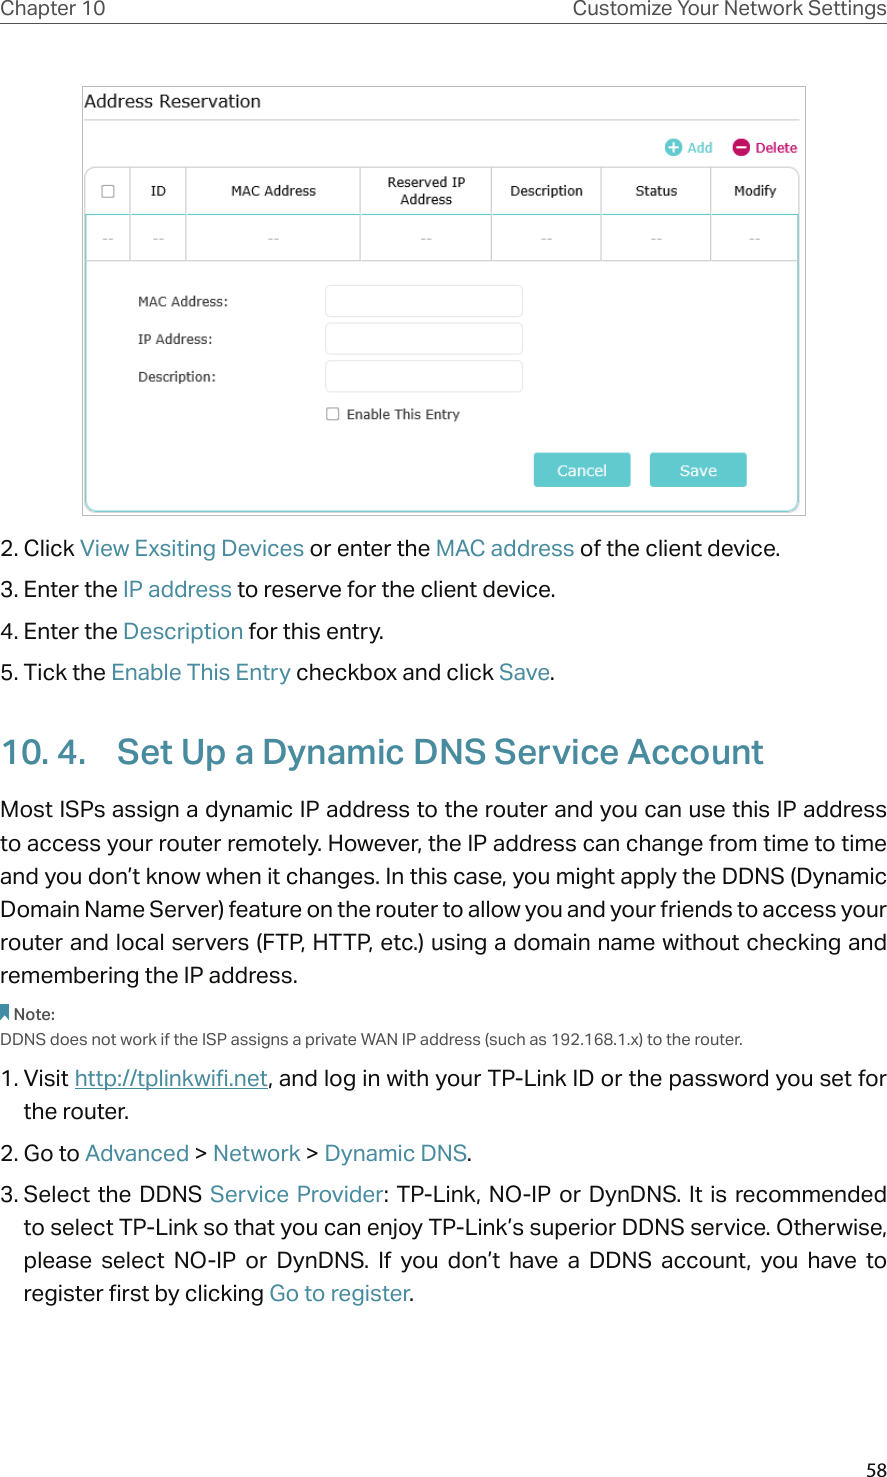 58Chapter 10 Customize Your Network Settings2. Click View Exsiting Devices or enter the MAC address of the client device.3. Enter the IP address to reserve for the client device.4. Enter the Description for this entry.5. Tick the Enable This Entry checkbox and click Save. 10. 4.  Set Up a Dynamic DNS Service AccountMost ISPs assign a dynamic IP address to the router and you can use this IP address to access your router remotely. However, the IP address can change from time to time and you don’t know when it changes. In this case, you might apply the DDNS (Dynamic Domain Name Server) feature on the router to allow you and your friends to access your router and local servers (FTP, HTTP, etc.) using a domain name without checking and remembering the IP address. Note: DDNS does not work if the ISP assigns a private WAN IP address (such as 192.168.1.x) to the router. 1. Visit http://tplinkwifi.net, and log in with your TP-Link ID or the password you set for the router.2. Go to Advanced &gt; Network &gt; Dynamic DNS.3. Select the  DDNS  Service Provider: TP-Link, NO-IP  or  DynDNS. It  is  recommended to select TP-Link so that you can enjoy TP-Link’s superior DDNS service. Otherwise, please  select  NO-IP  or  DynDNS.  If  you  don’t  have  a  DDNS  account,  you  have  to  register first by clicking Go to register.